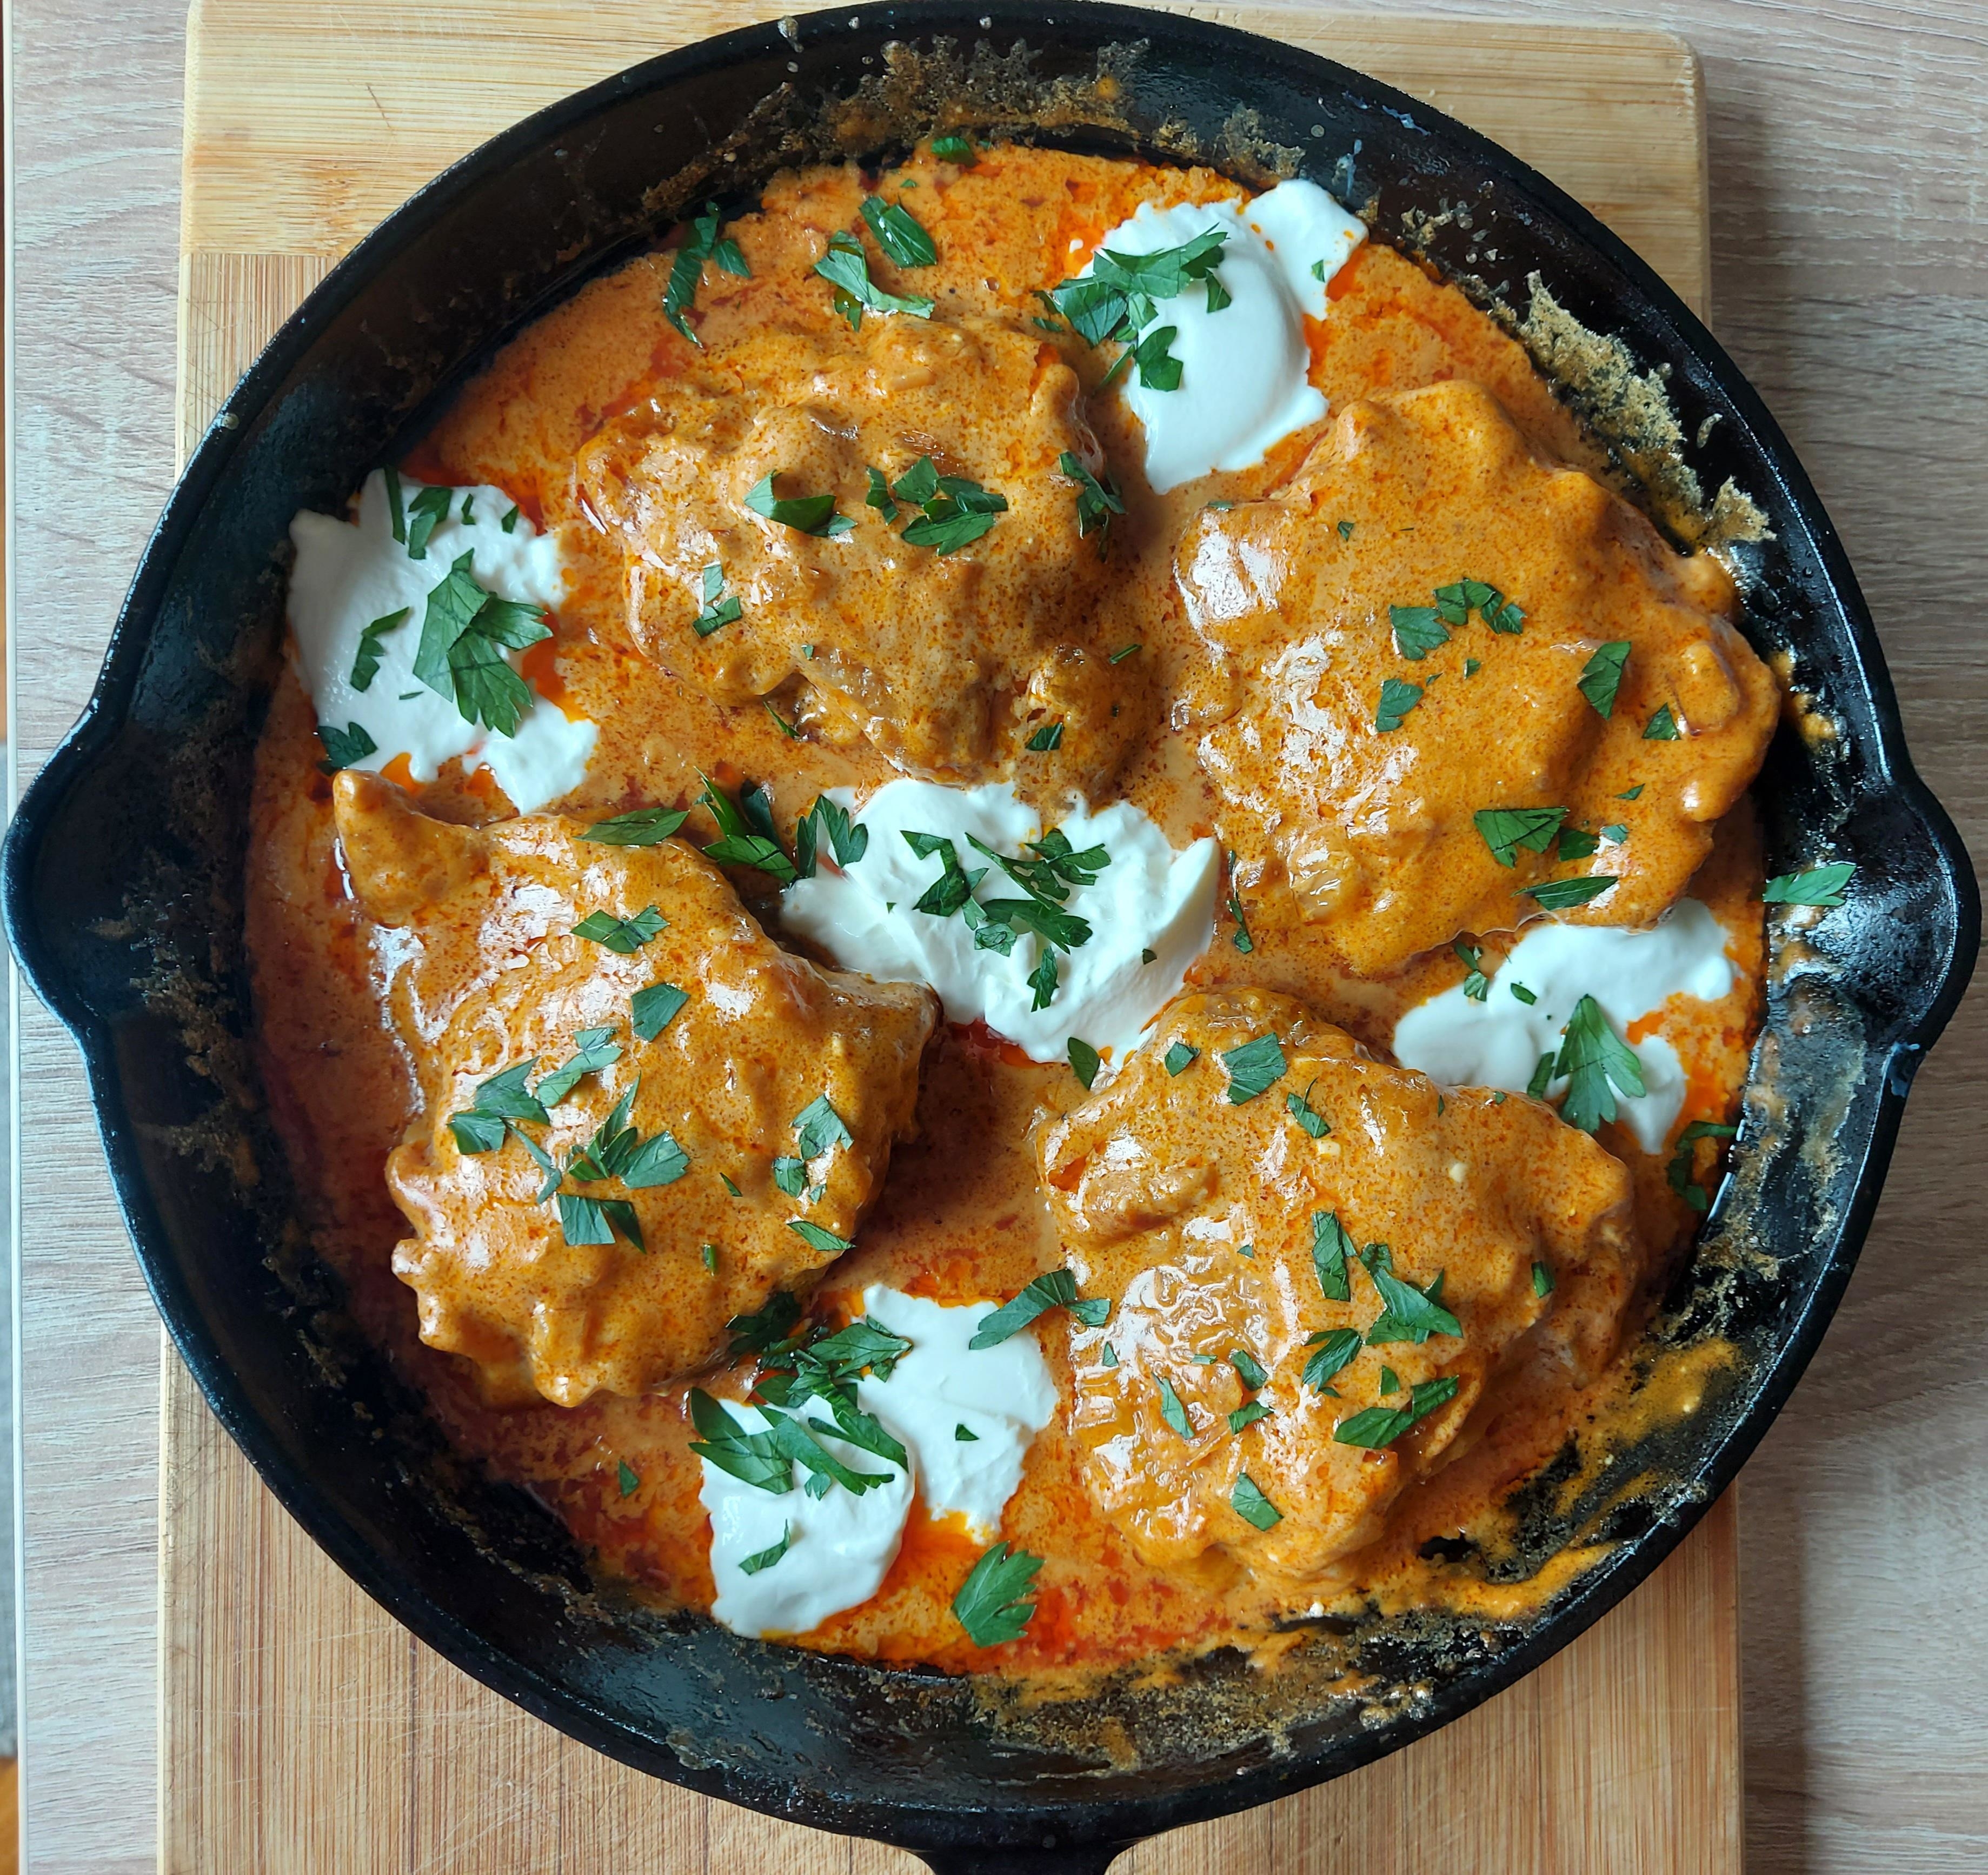 Chicken paprikash in a cast-iron pan with herbs and sour cream on top